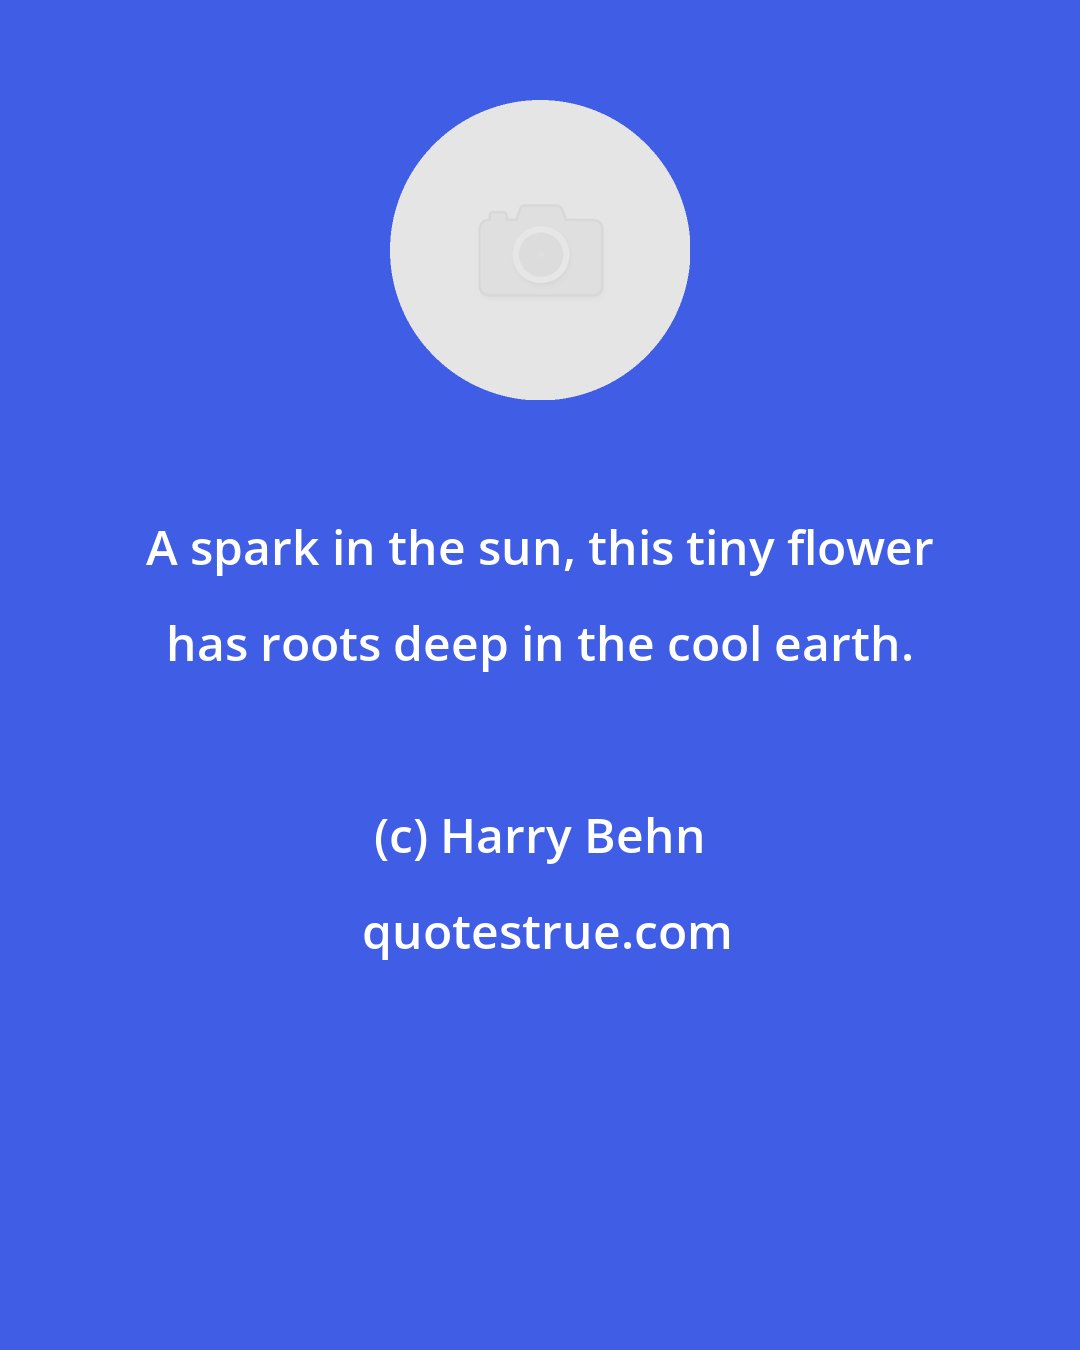 Harry Behn: A spark in the sun, this tiny flower has roots deep in the cool earth.